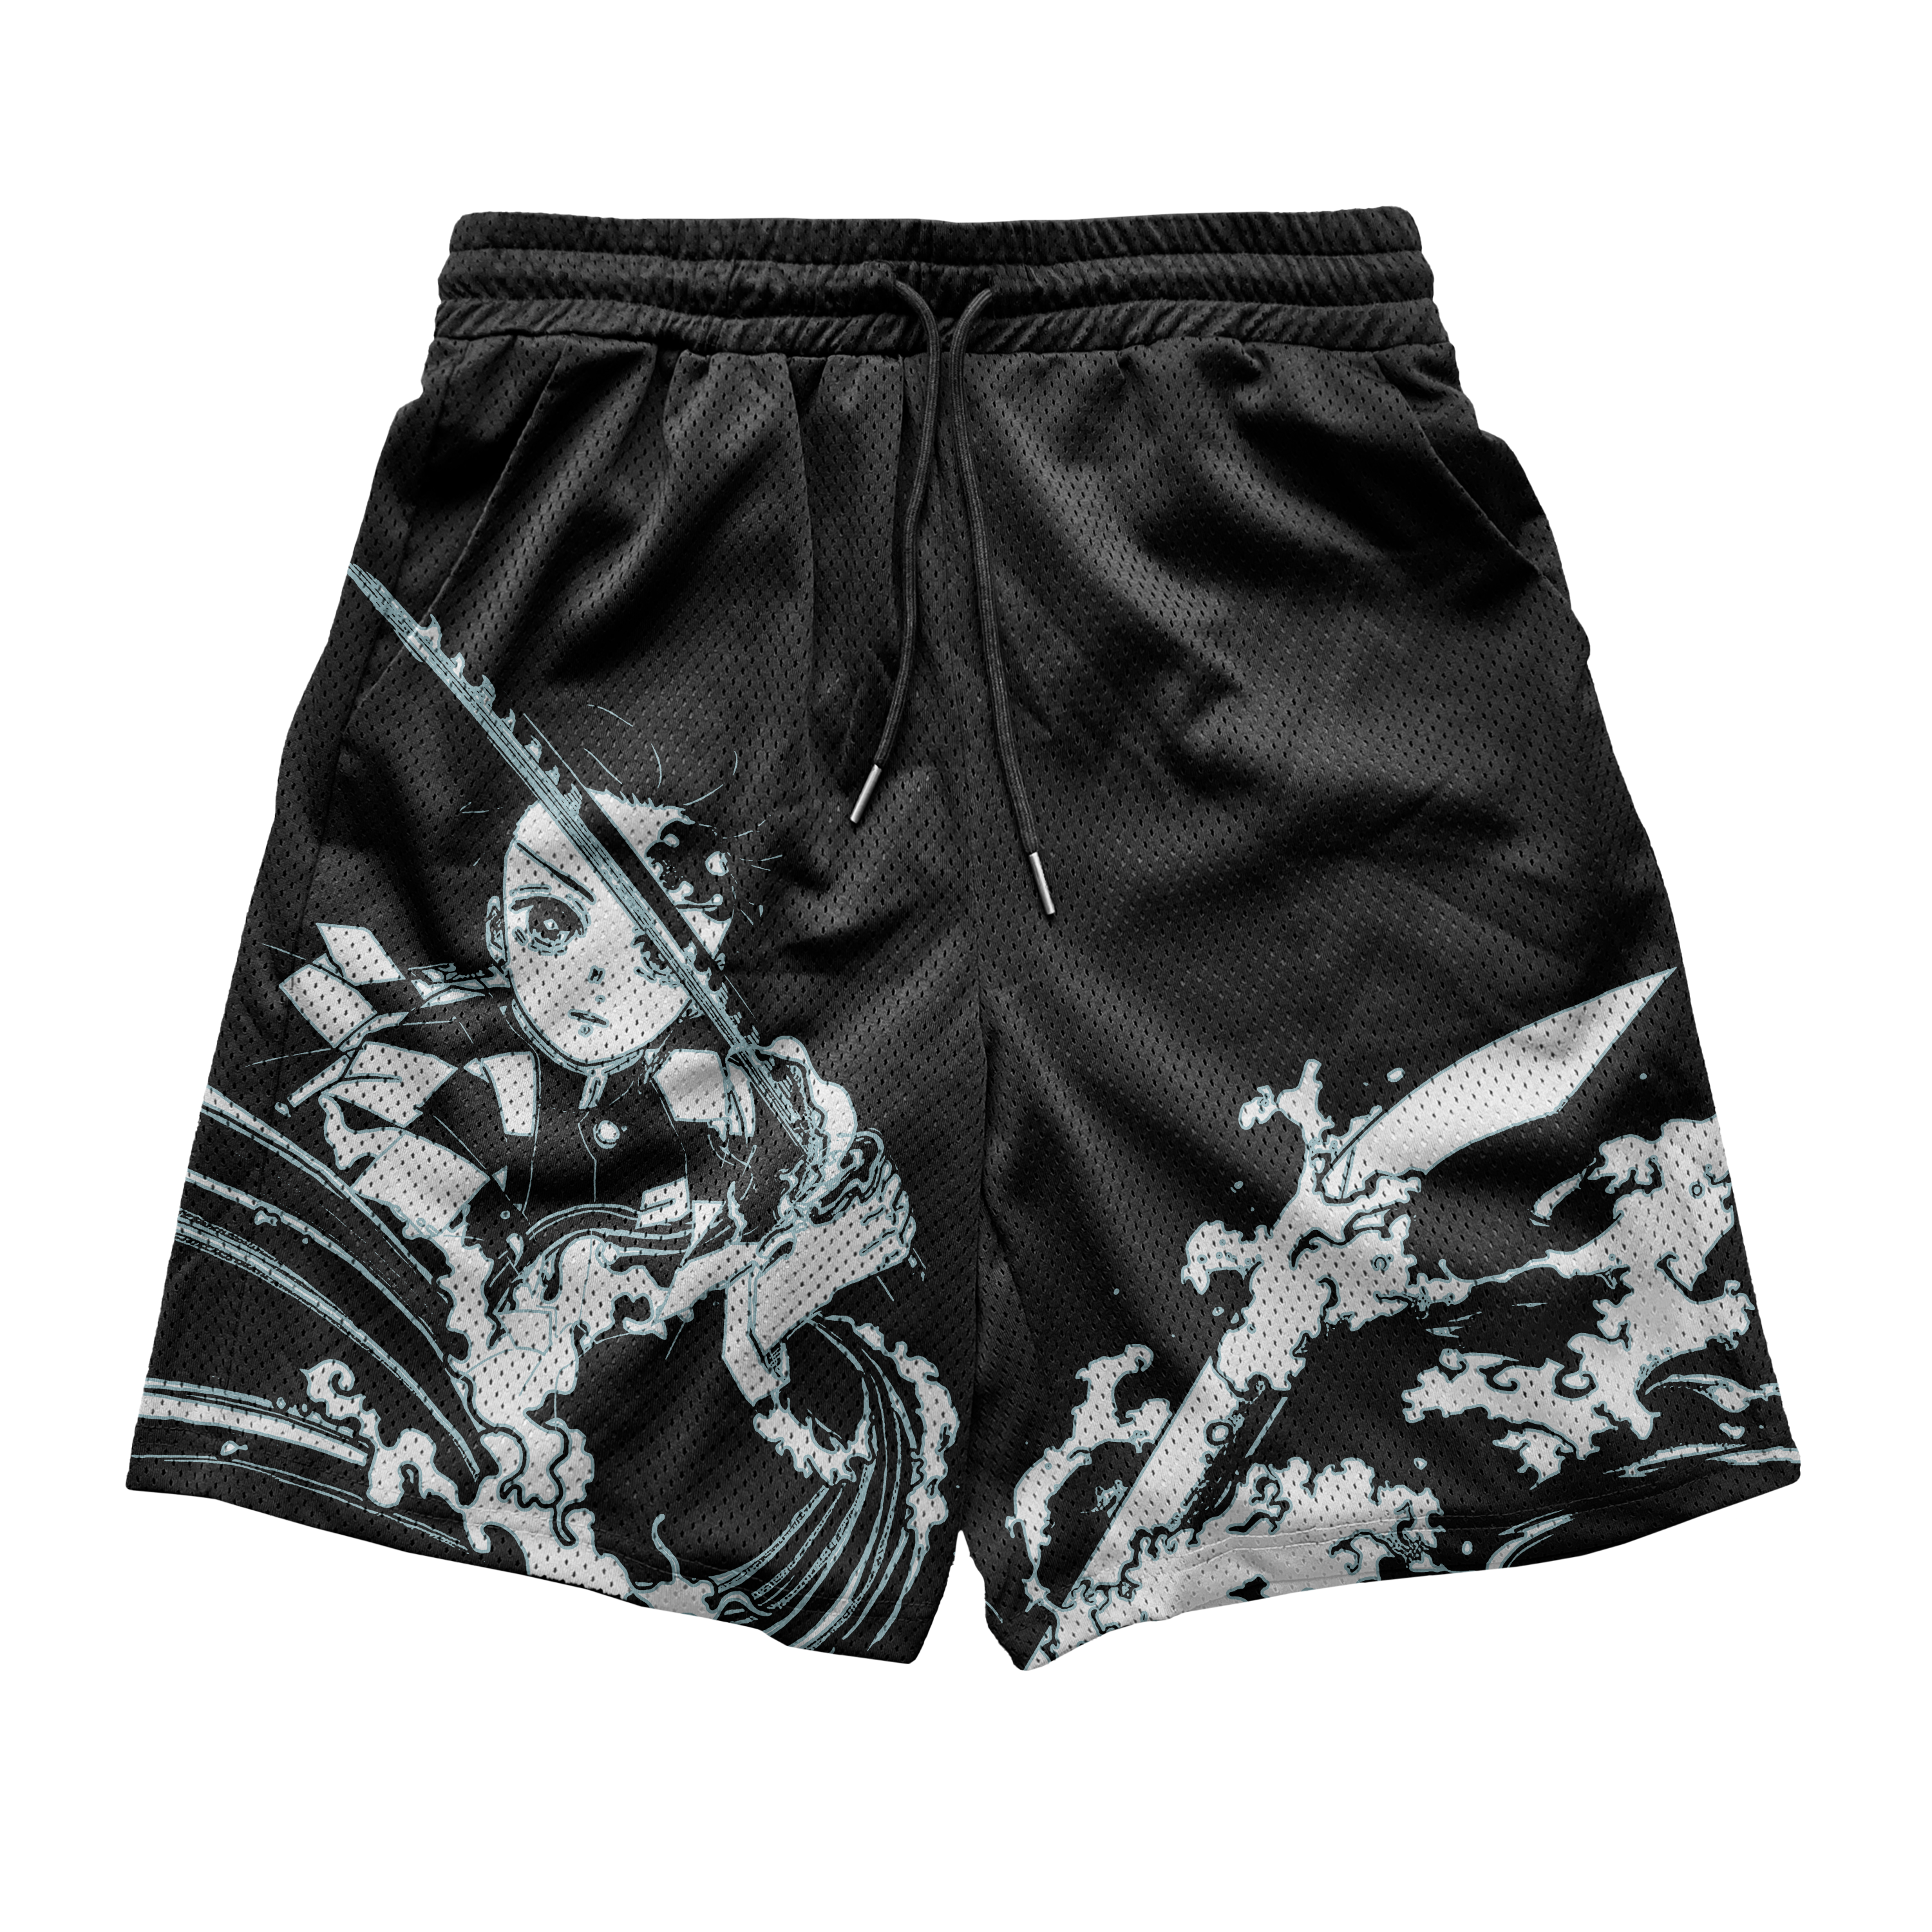 All-Over Print Men's Basketball Shorts Fast Drying